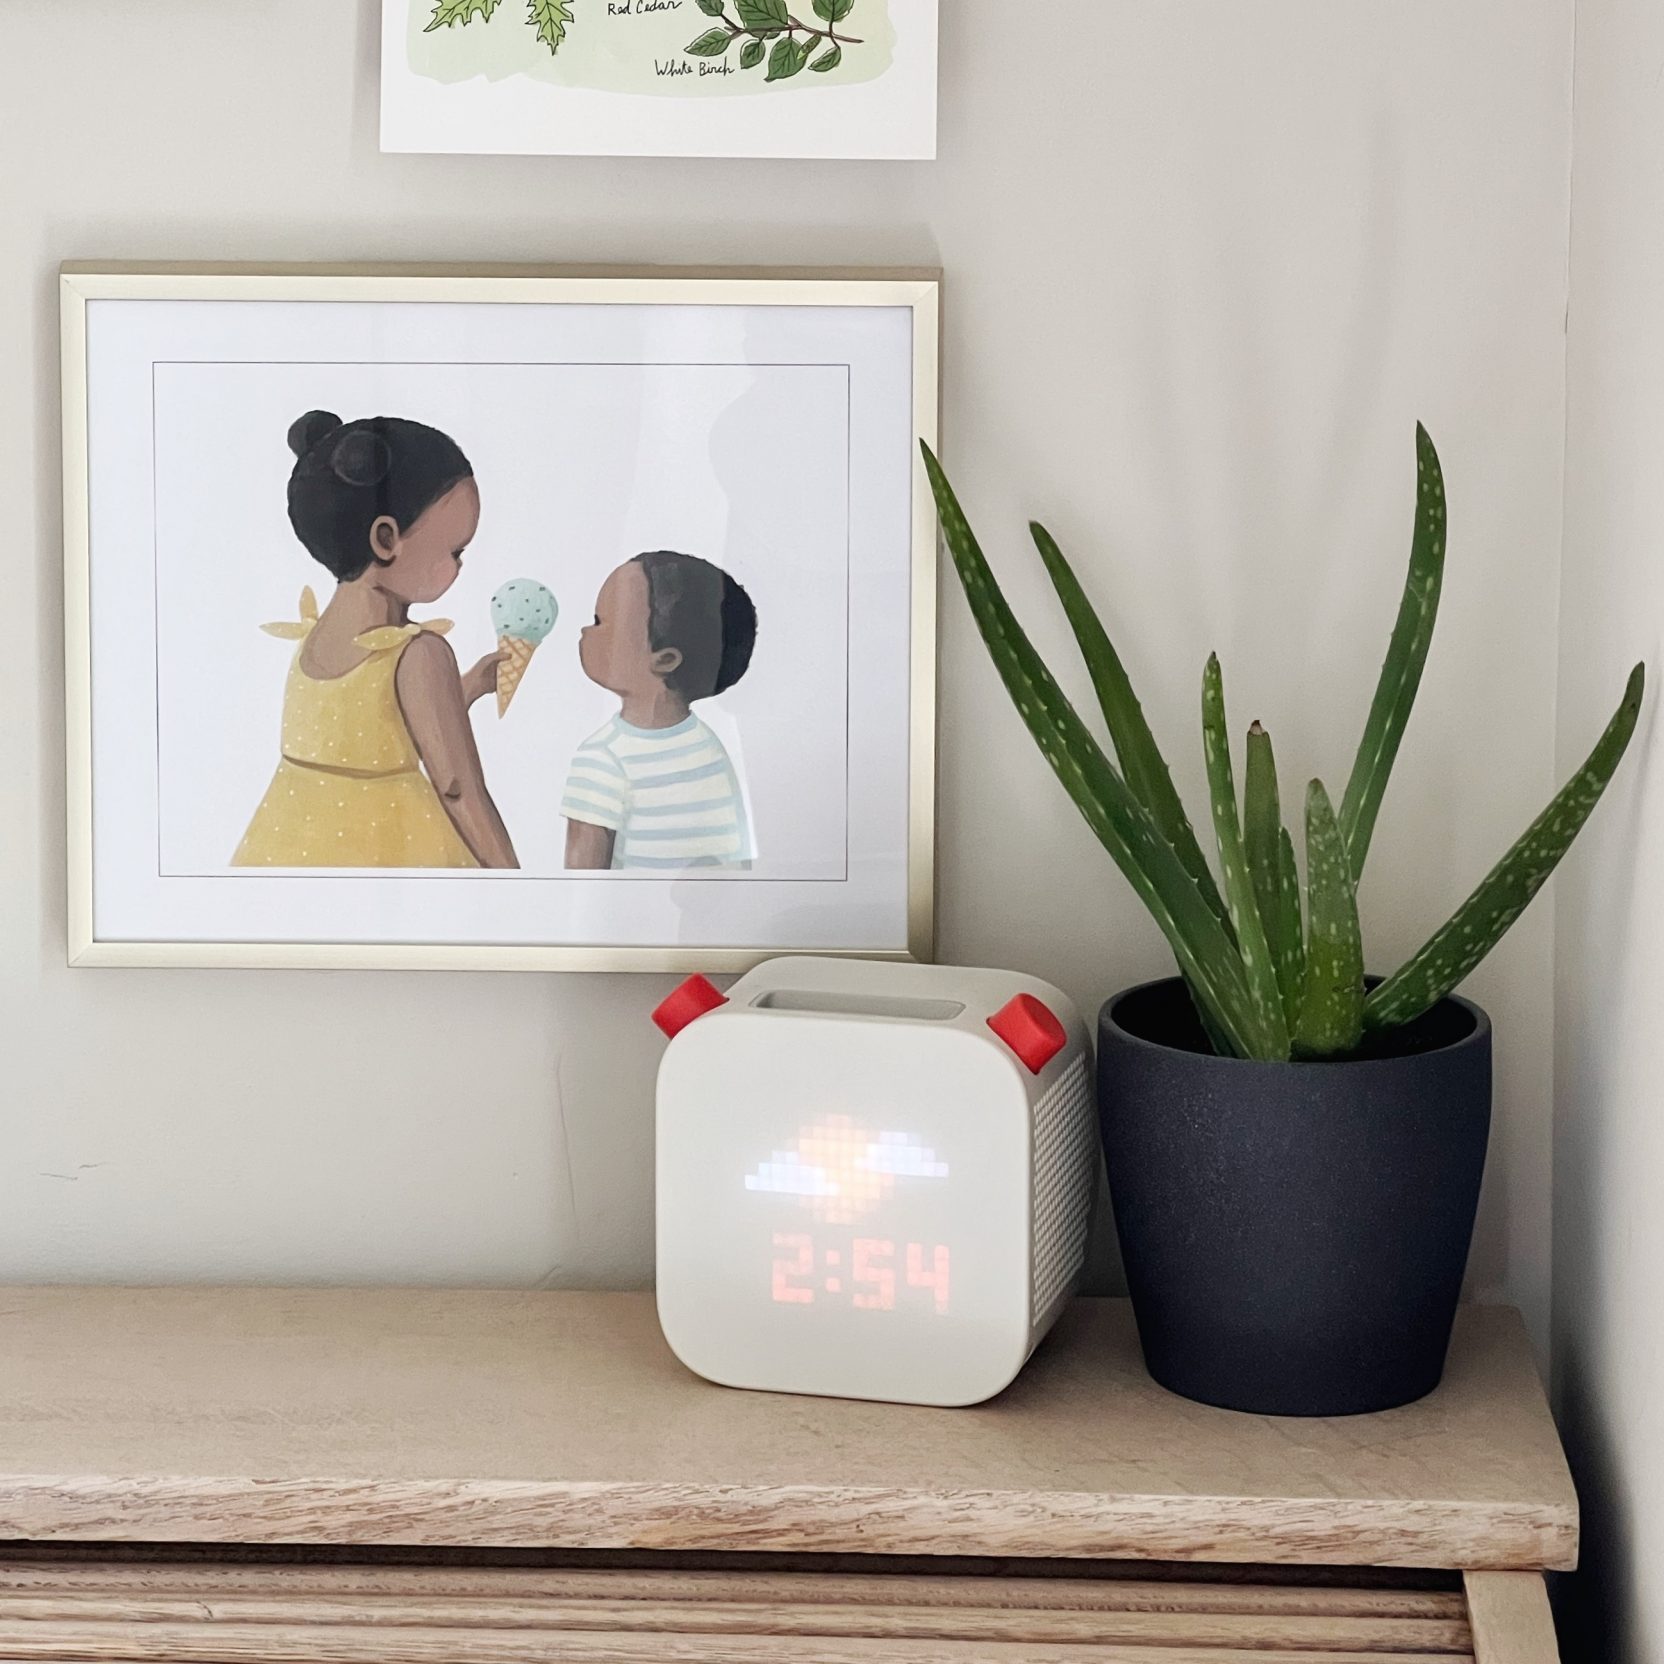 Yoto vs. Tonie: The Best Audio Player for Kids